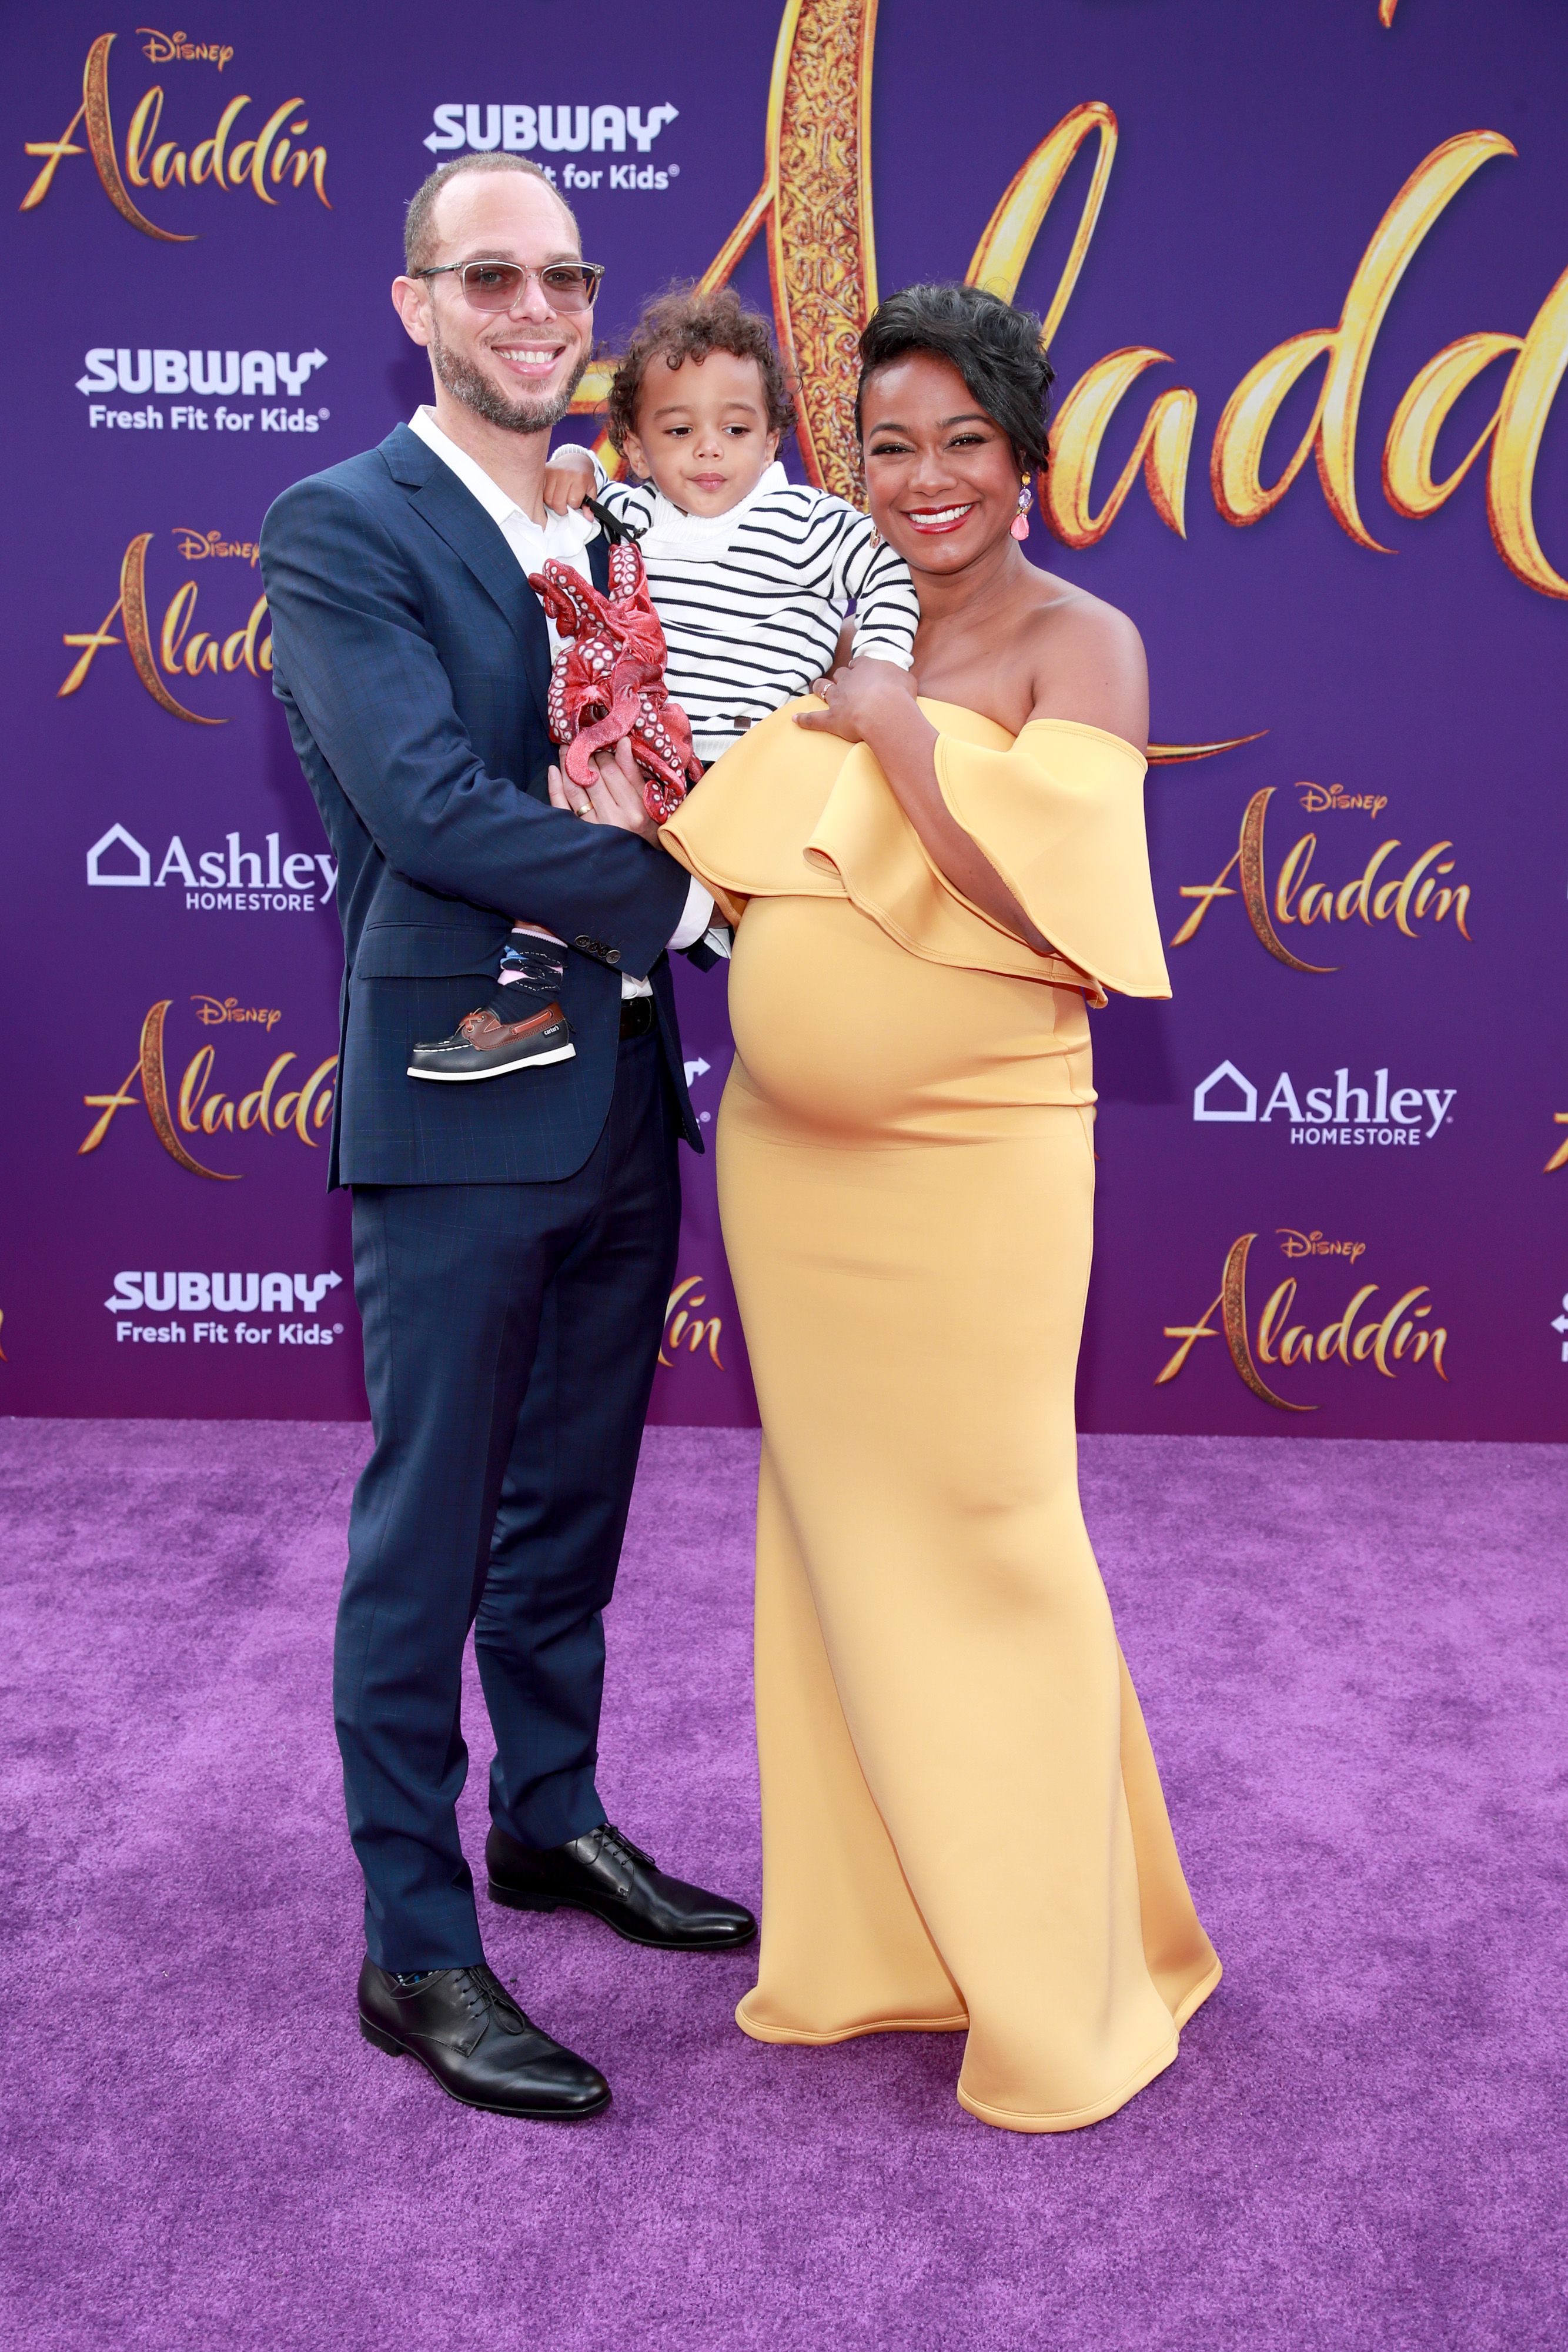 Tatyana Ali, husband Vaughn Rasberry, and son Edward at the premiere of "Aladdin" in 2019 in Los Angeles | Source: Getty Images